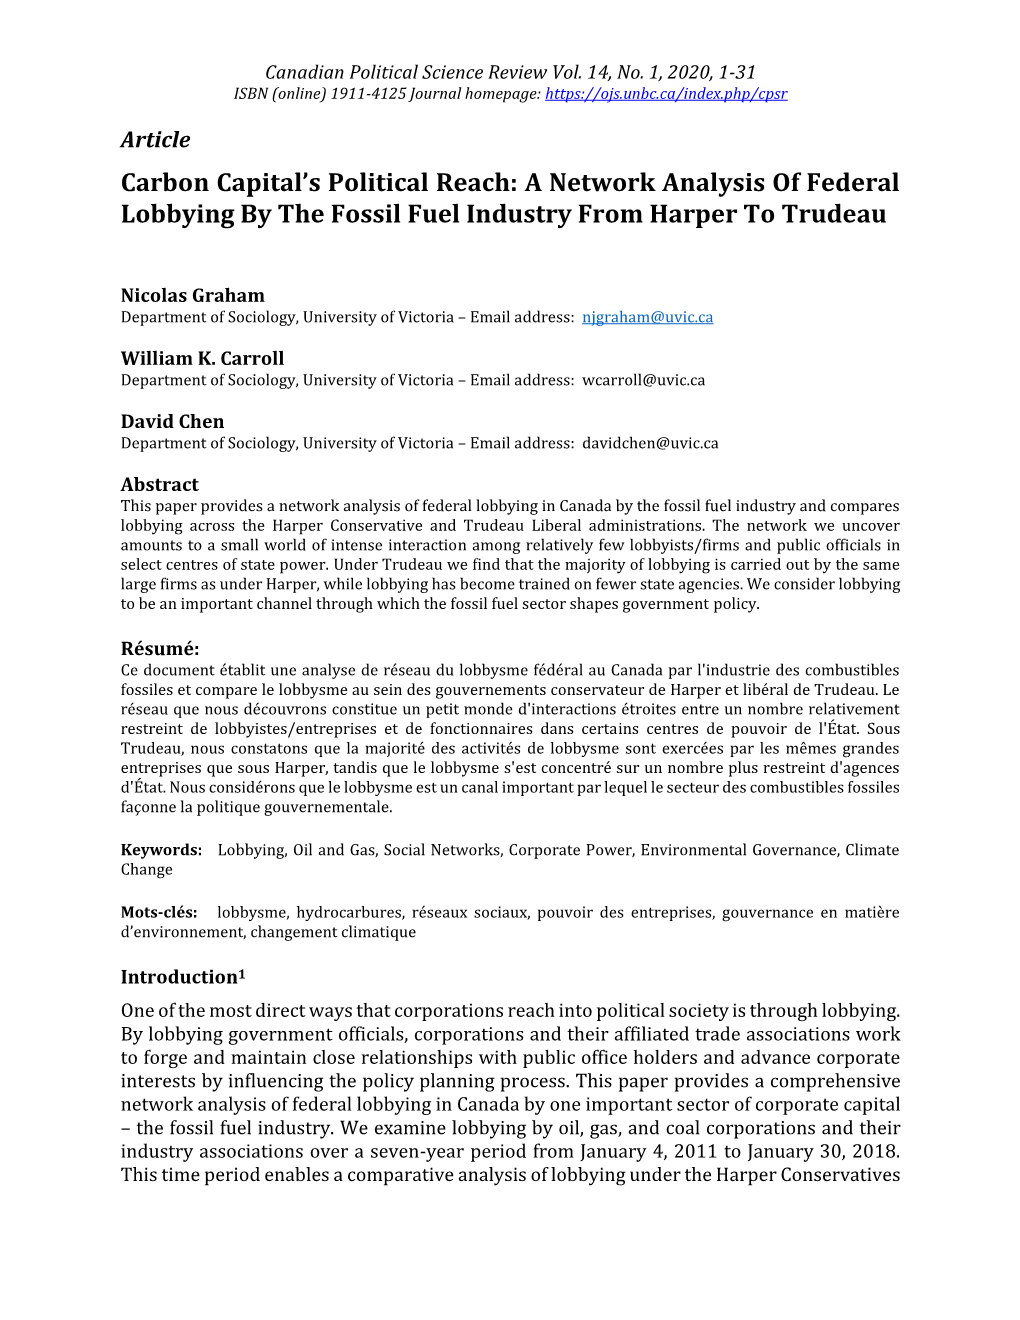 Carbon Capital's Political Reach: a Network Analysis of Federal Lobbying by the Fossil Fuel Industry from Harper to Trudeau